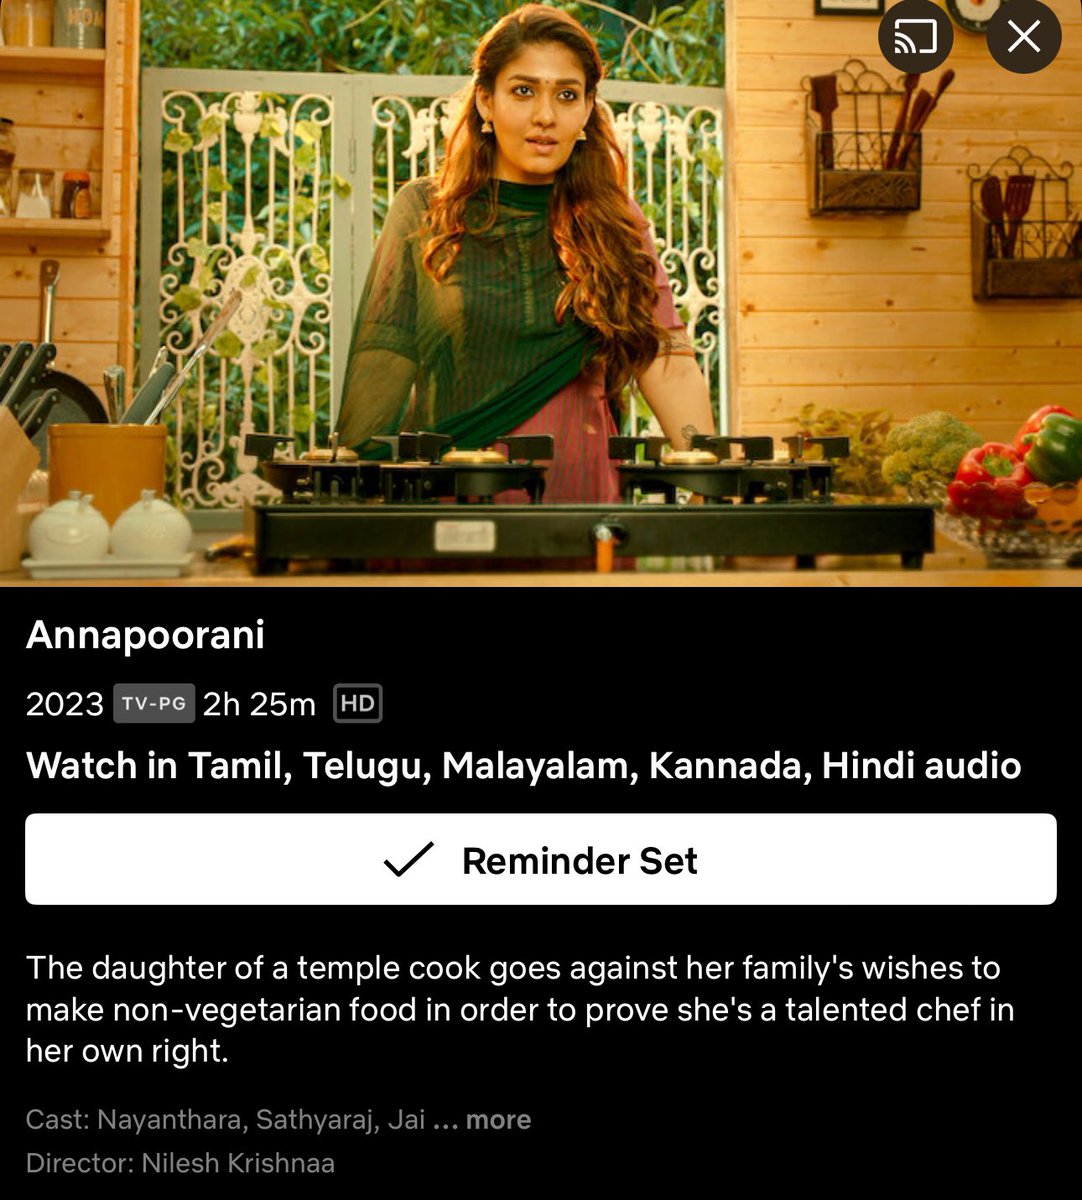 Annapoorni movie removed from Netflix 👏👏 Hindu Unity matters! 👏